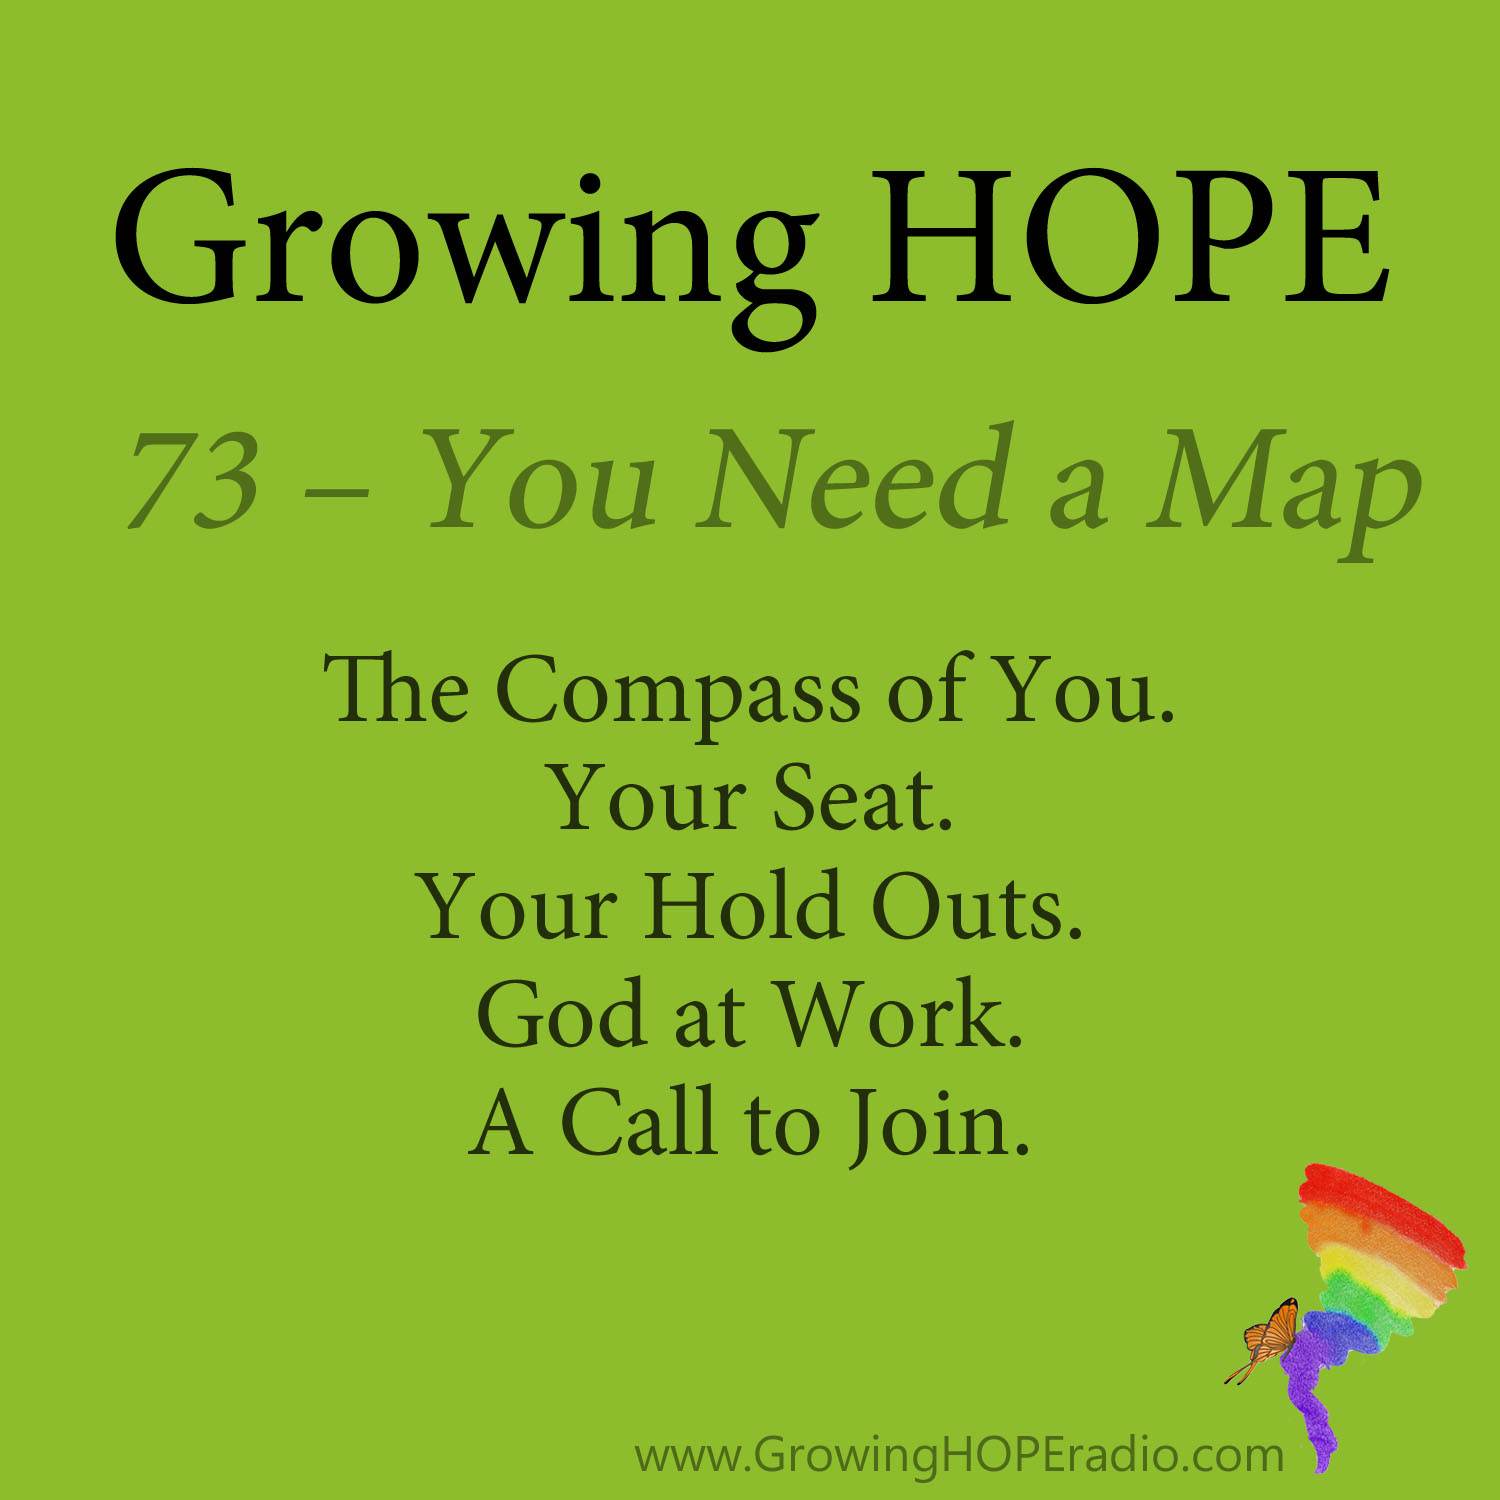 #GrowingHOPE Daily - 5 POints - 73 - You Need a Map